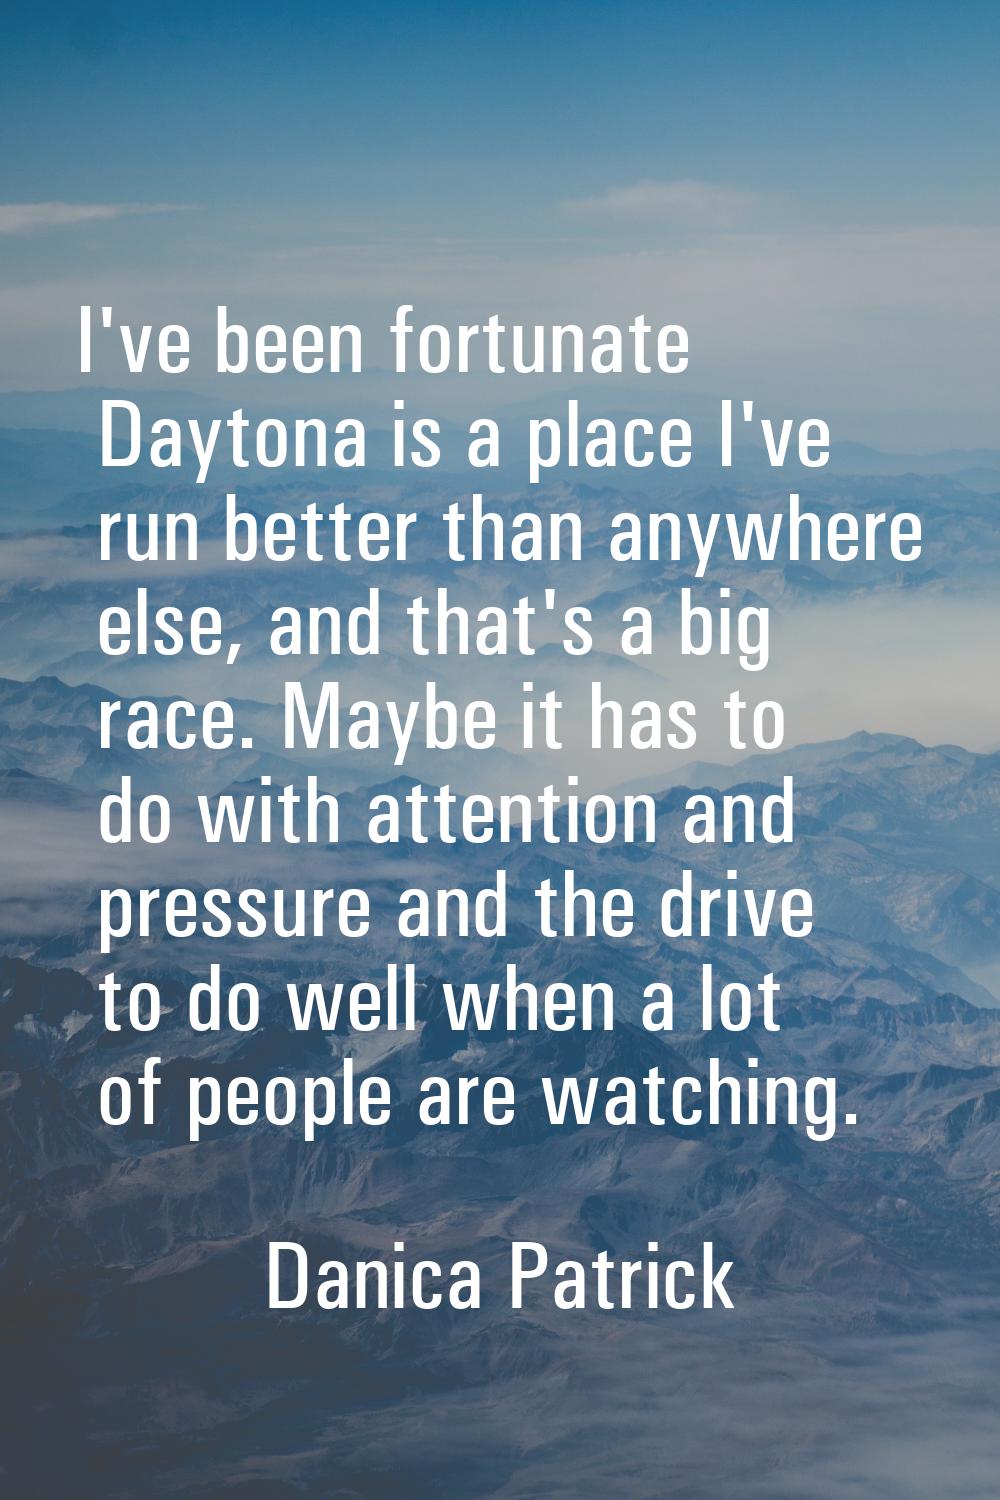 I've been fortunate Daytona is a place I've run better than anywhere else, and that's a big race. M